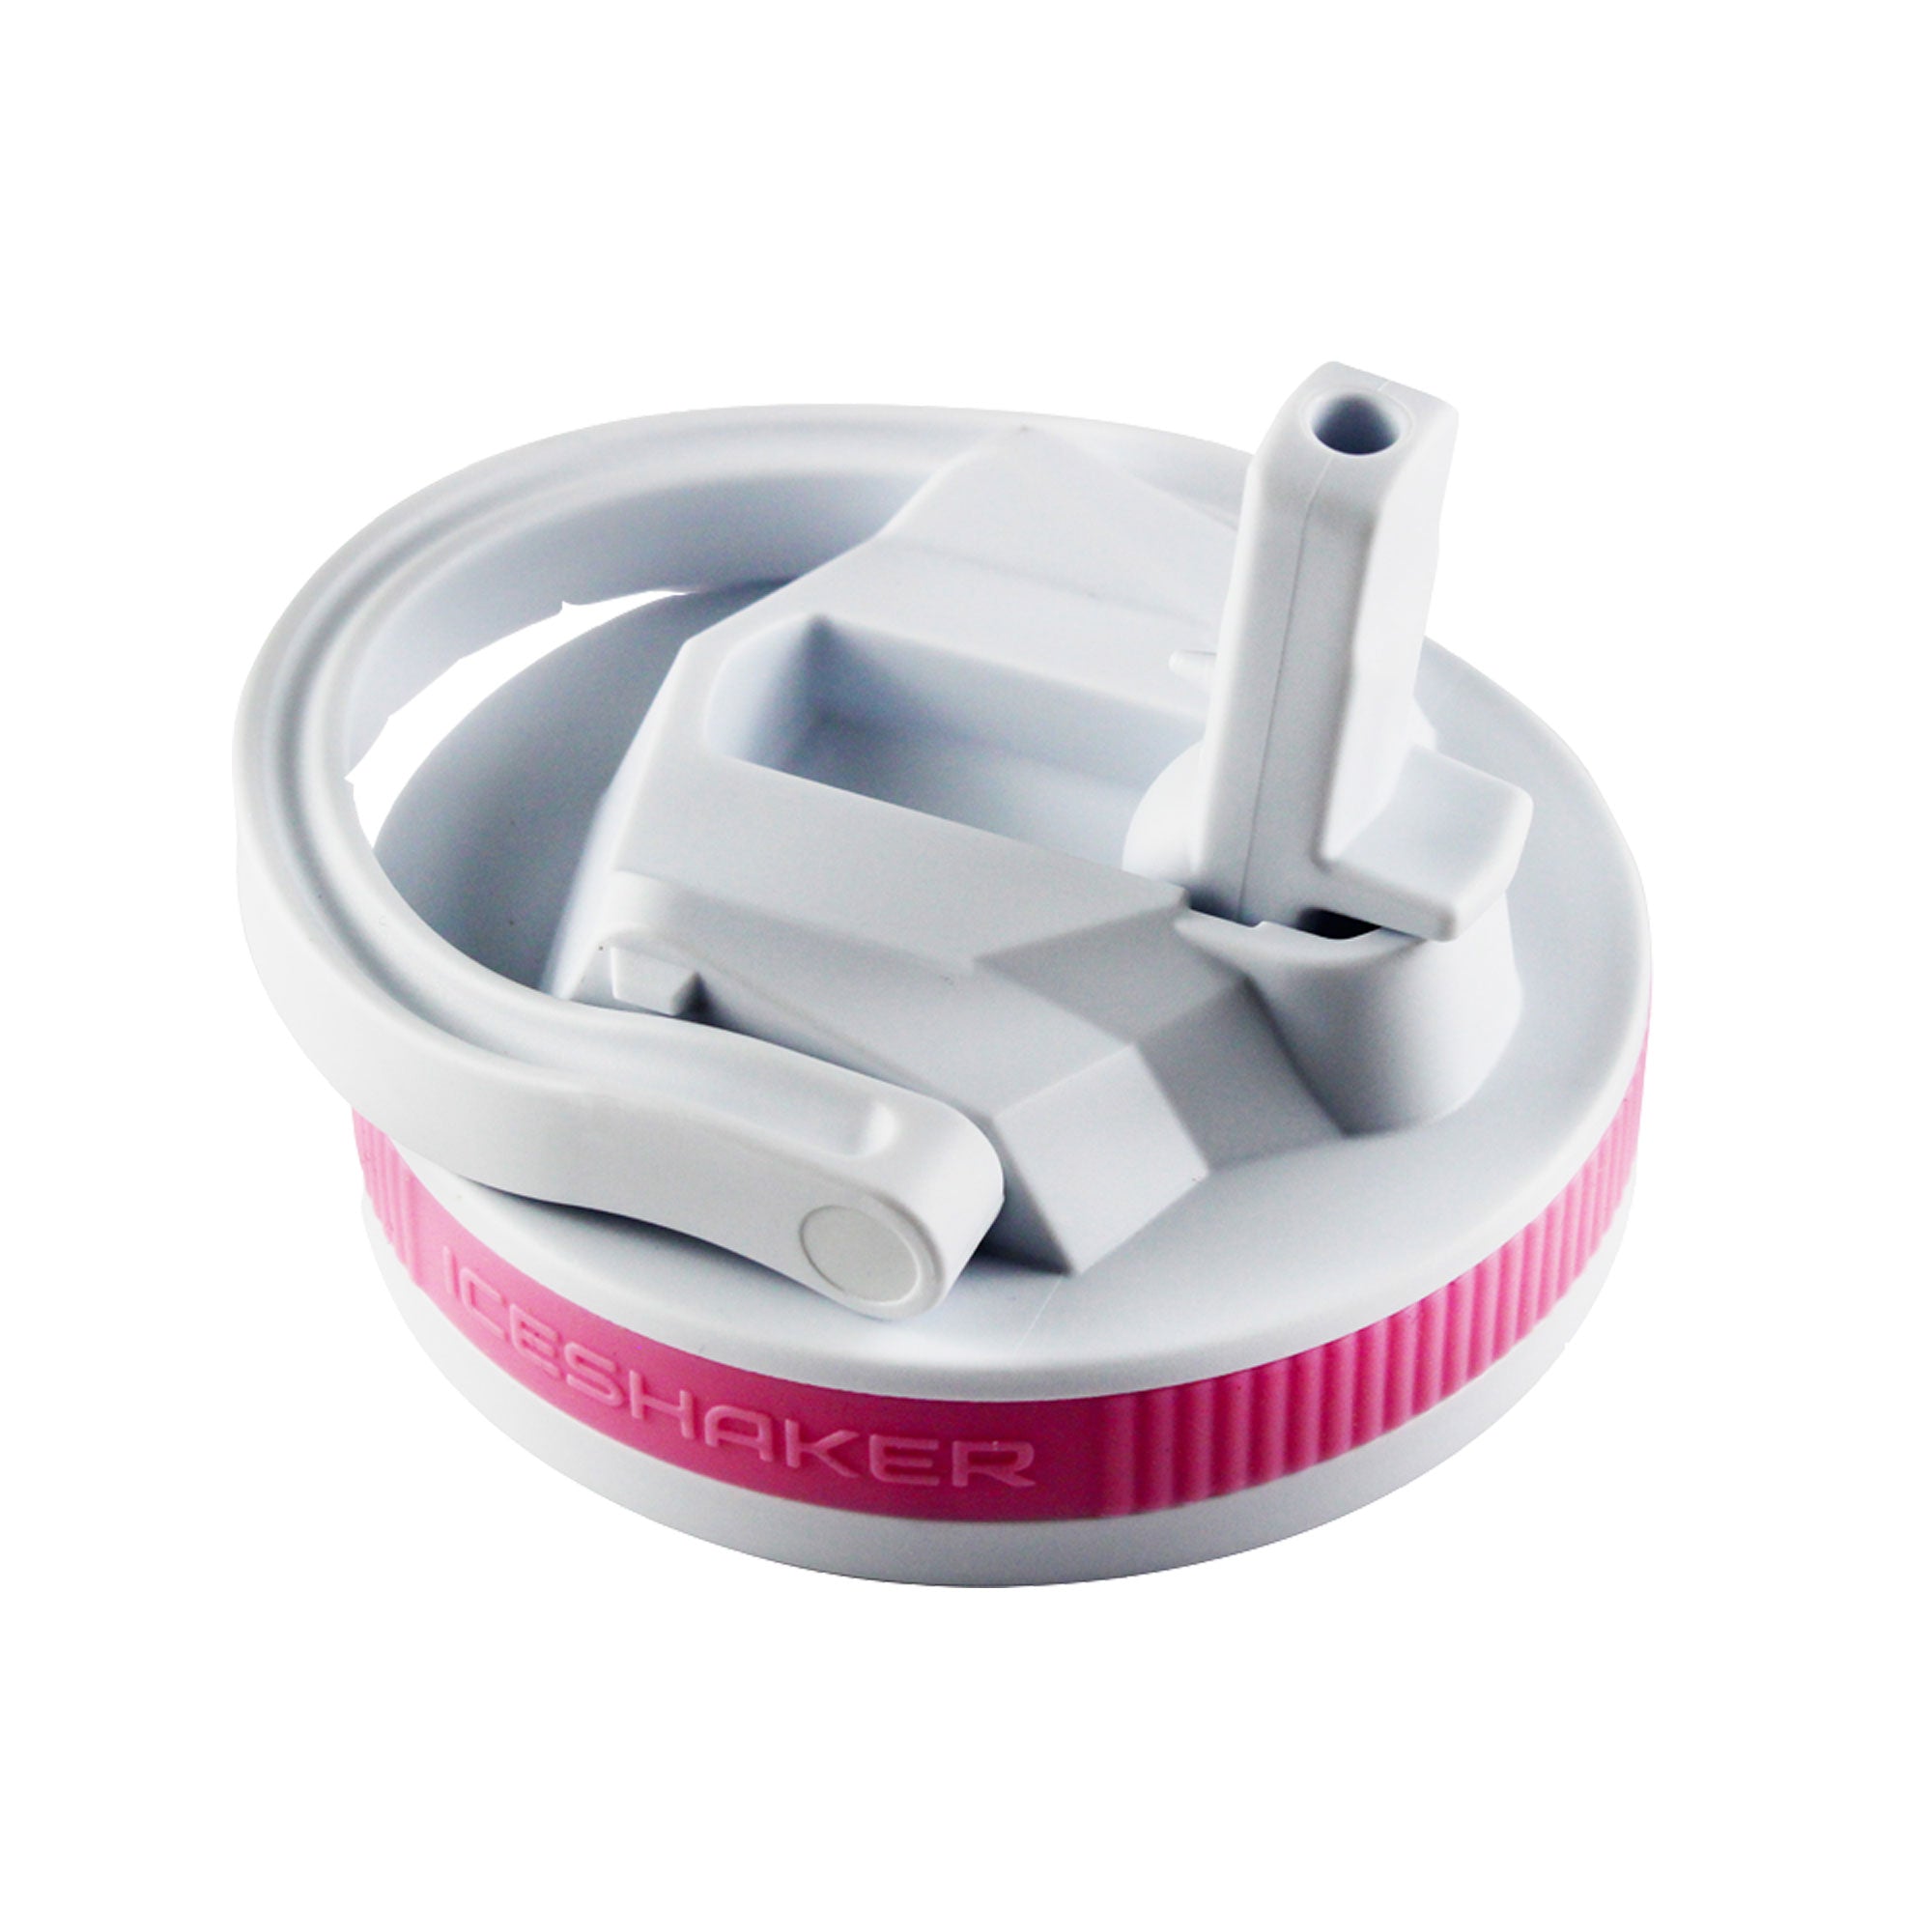 26oz Sport Bottle Lid & Internal Straw - White Lid with Pink Band